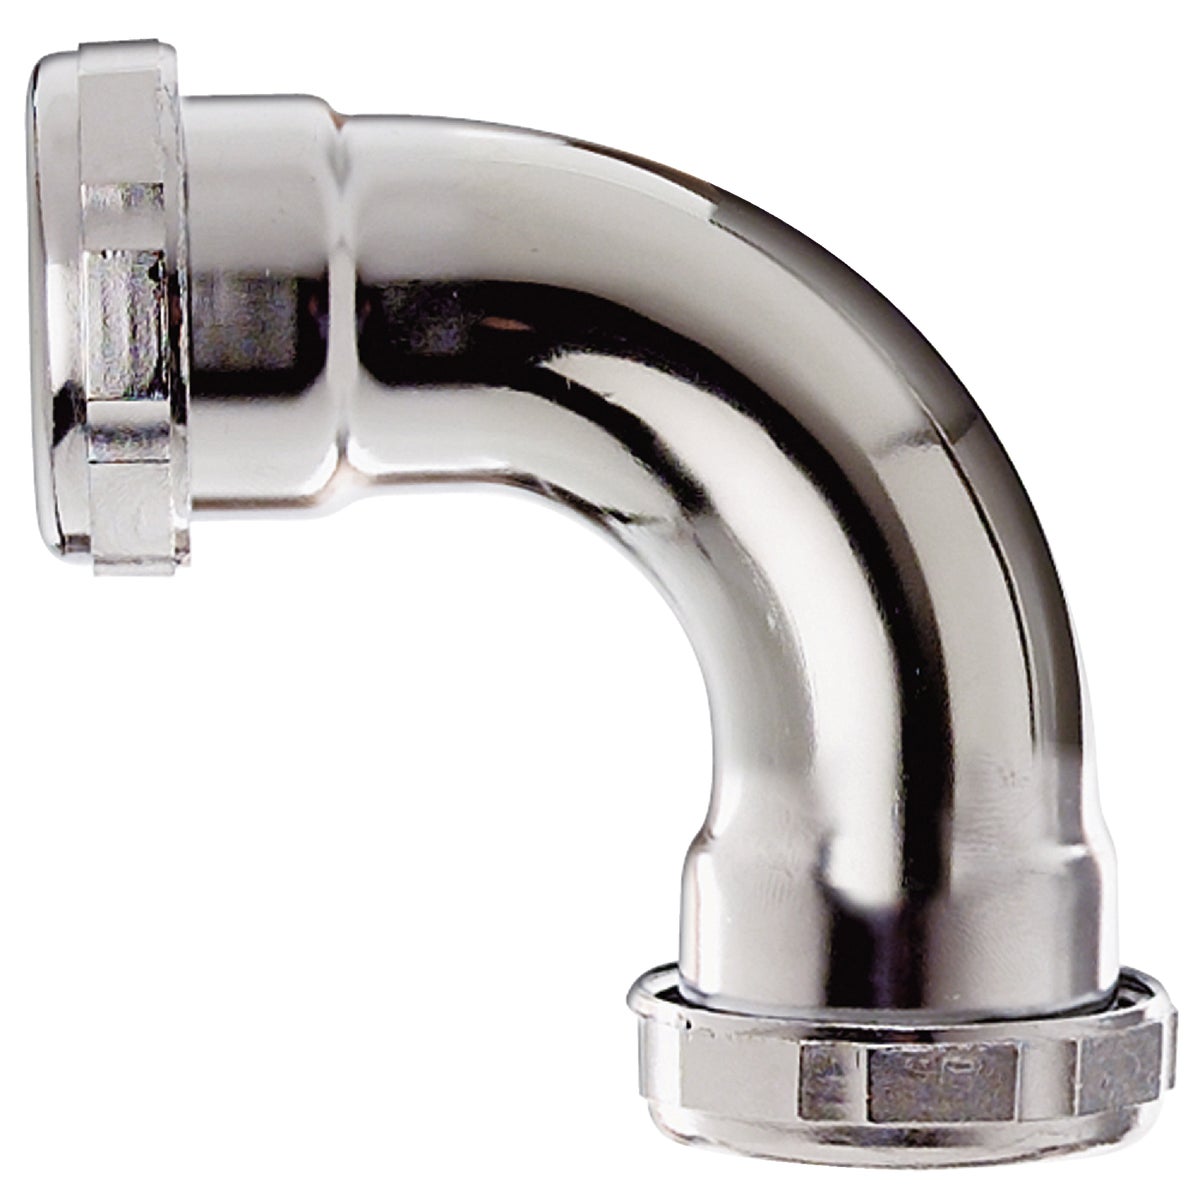 Item 409052, Chrome-plated. Slip-joint fitting both ends. Fits 1-1/2" O.D.